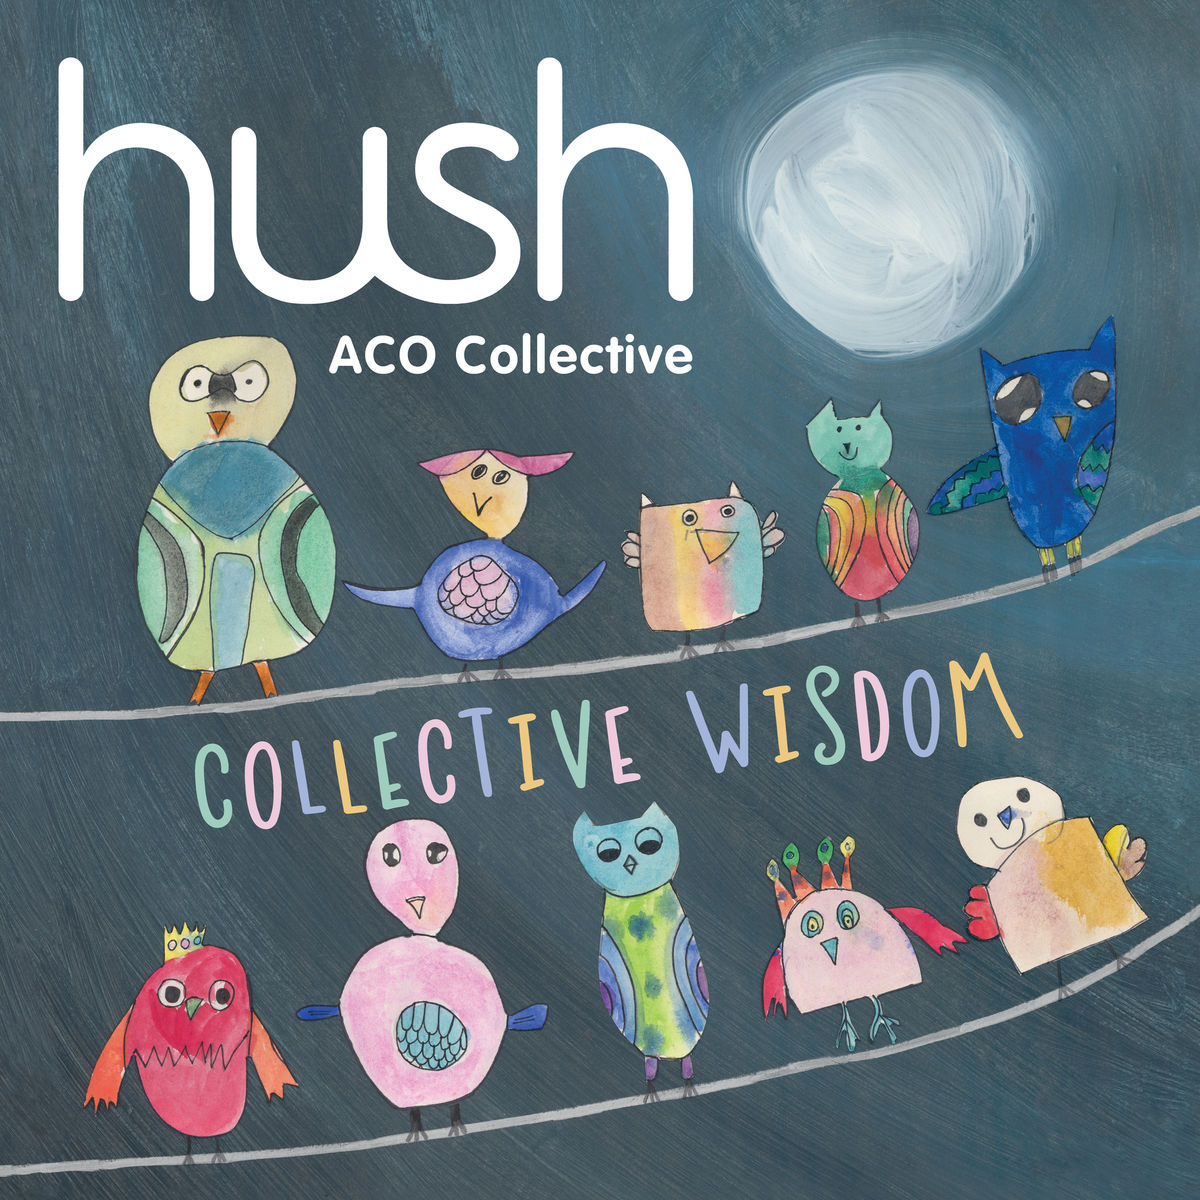 ACO Collective - Collective Wisdom (The Hush Collection, Vol. 18) (2018) [FLAC 24bit/96kHz]